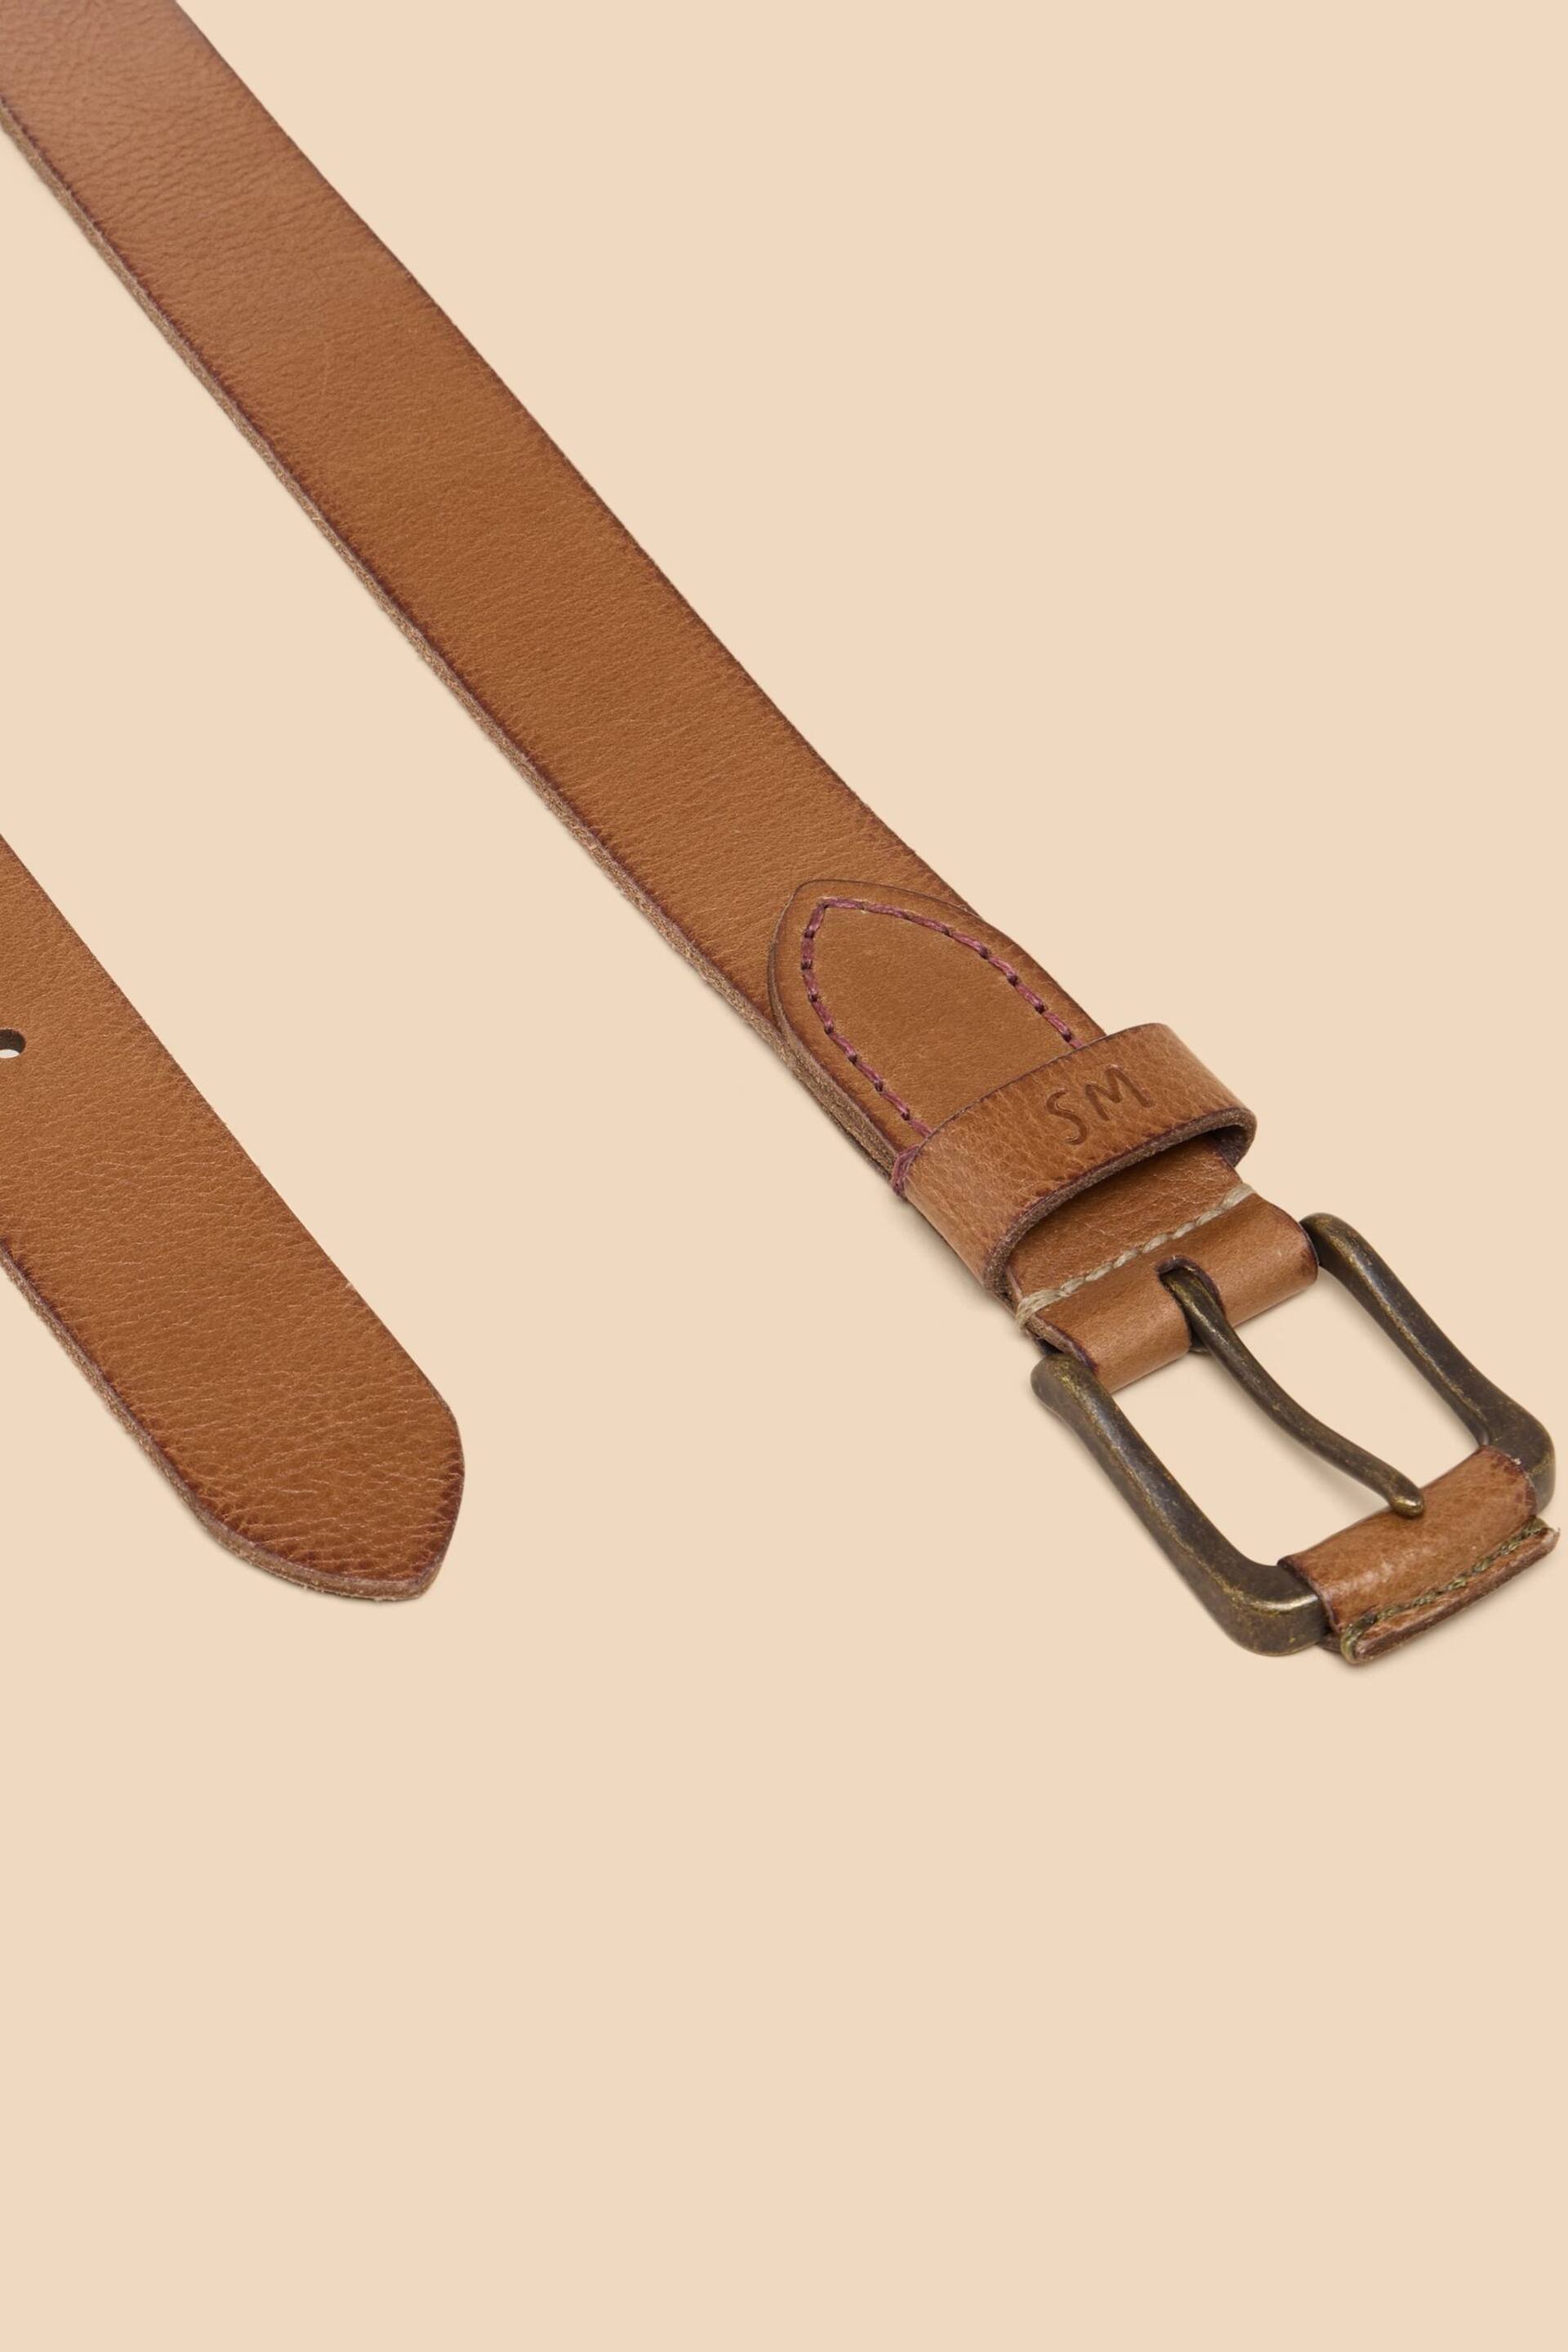 White Stuff Brown Leather Belt - Image 3 of 3